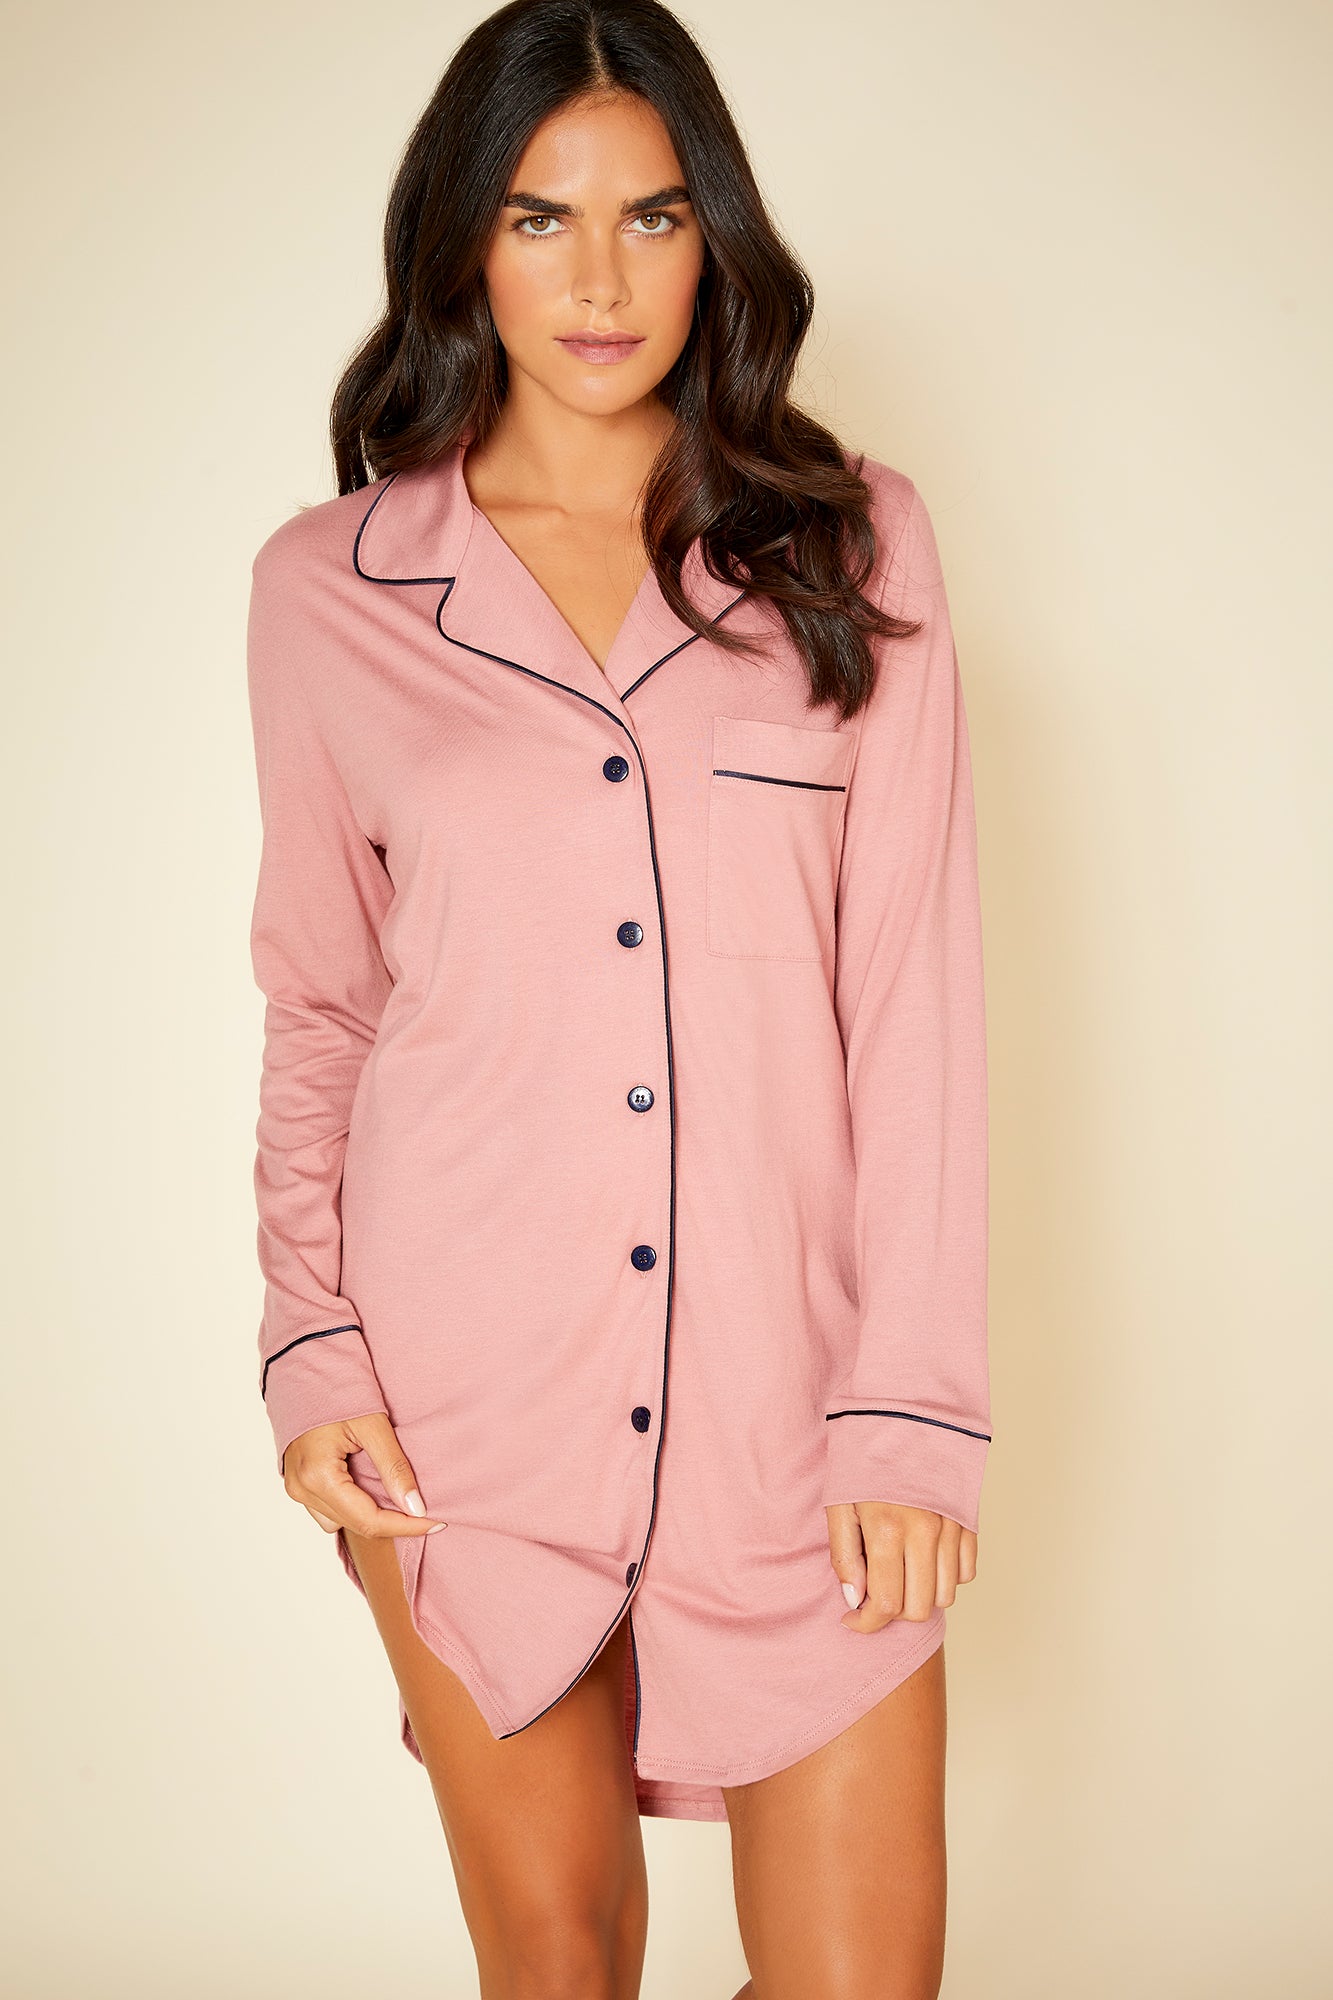 Cosabella, Amore Love Extended Sleep Shirt